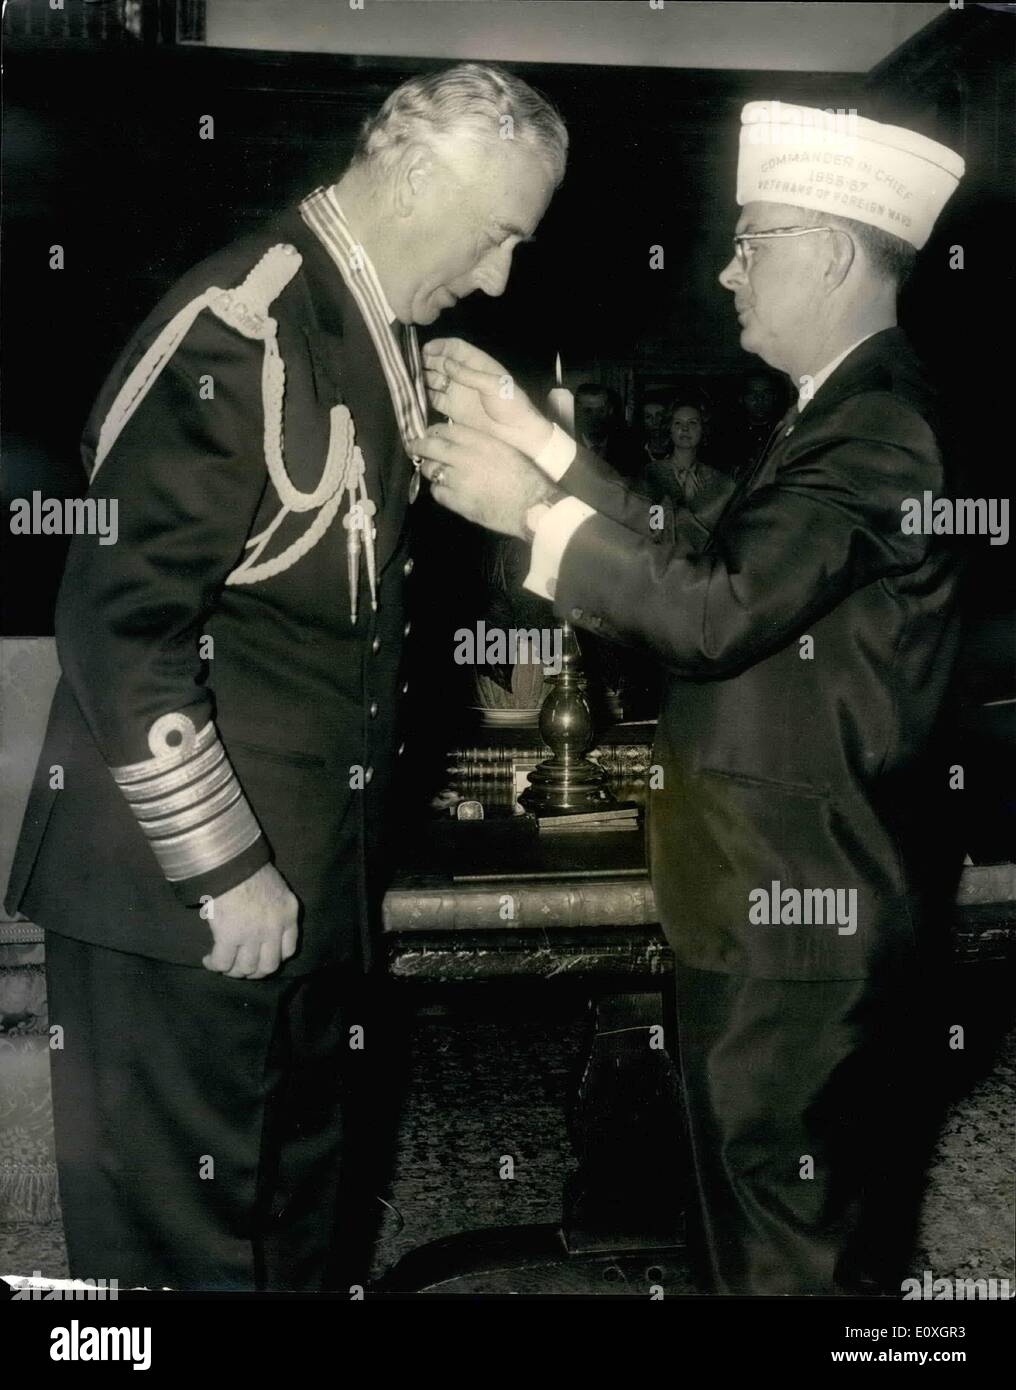 Oct. 10, 1966 - Earl Mountbatten and Douglas Fairbanes Jnr. Are presented with V.F.H. C-In-C's Gold Medal of Merit: The presentation of Commander-in-chief Gold Medal of Merit and Citation (Veterans of Foreign Wars of the United States) to Admiral of the Fleet, Earl Mountbatten of Burma, K.G. and to Captain Douglas Fairbanks, Jr. United States Naval Reserve (retired) by the Commander-in-Chief of the VFW, Leslie M. Fry, took place today at Sutton Place, Surrey, the home of Mr, Paul Getty Stock Photo